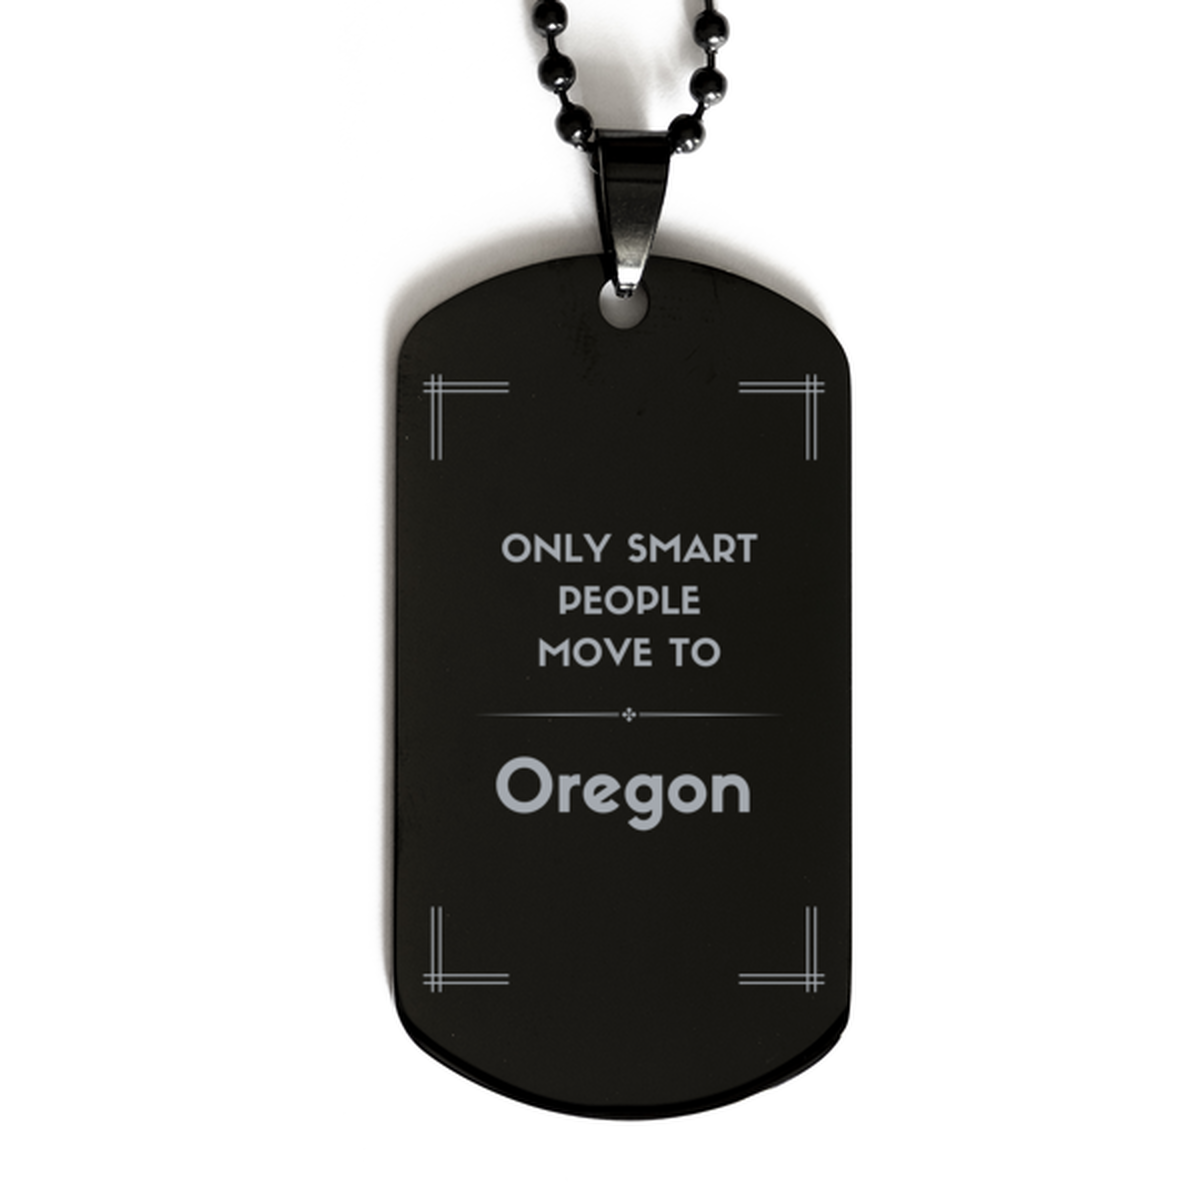 Only smart people move to Oregon Black Dog Tag, Gag Gifts For Oregon, Move to Oregon Gifts for Friends Coworker Funny Saying Quote